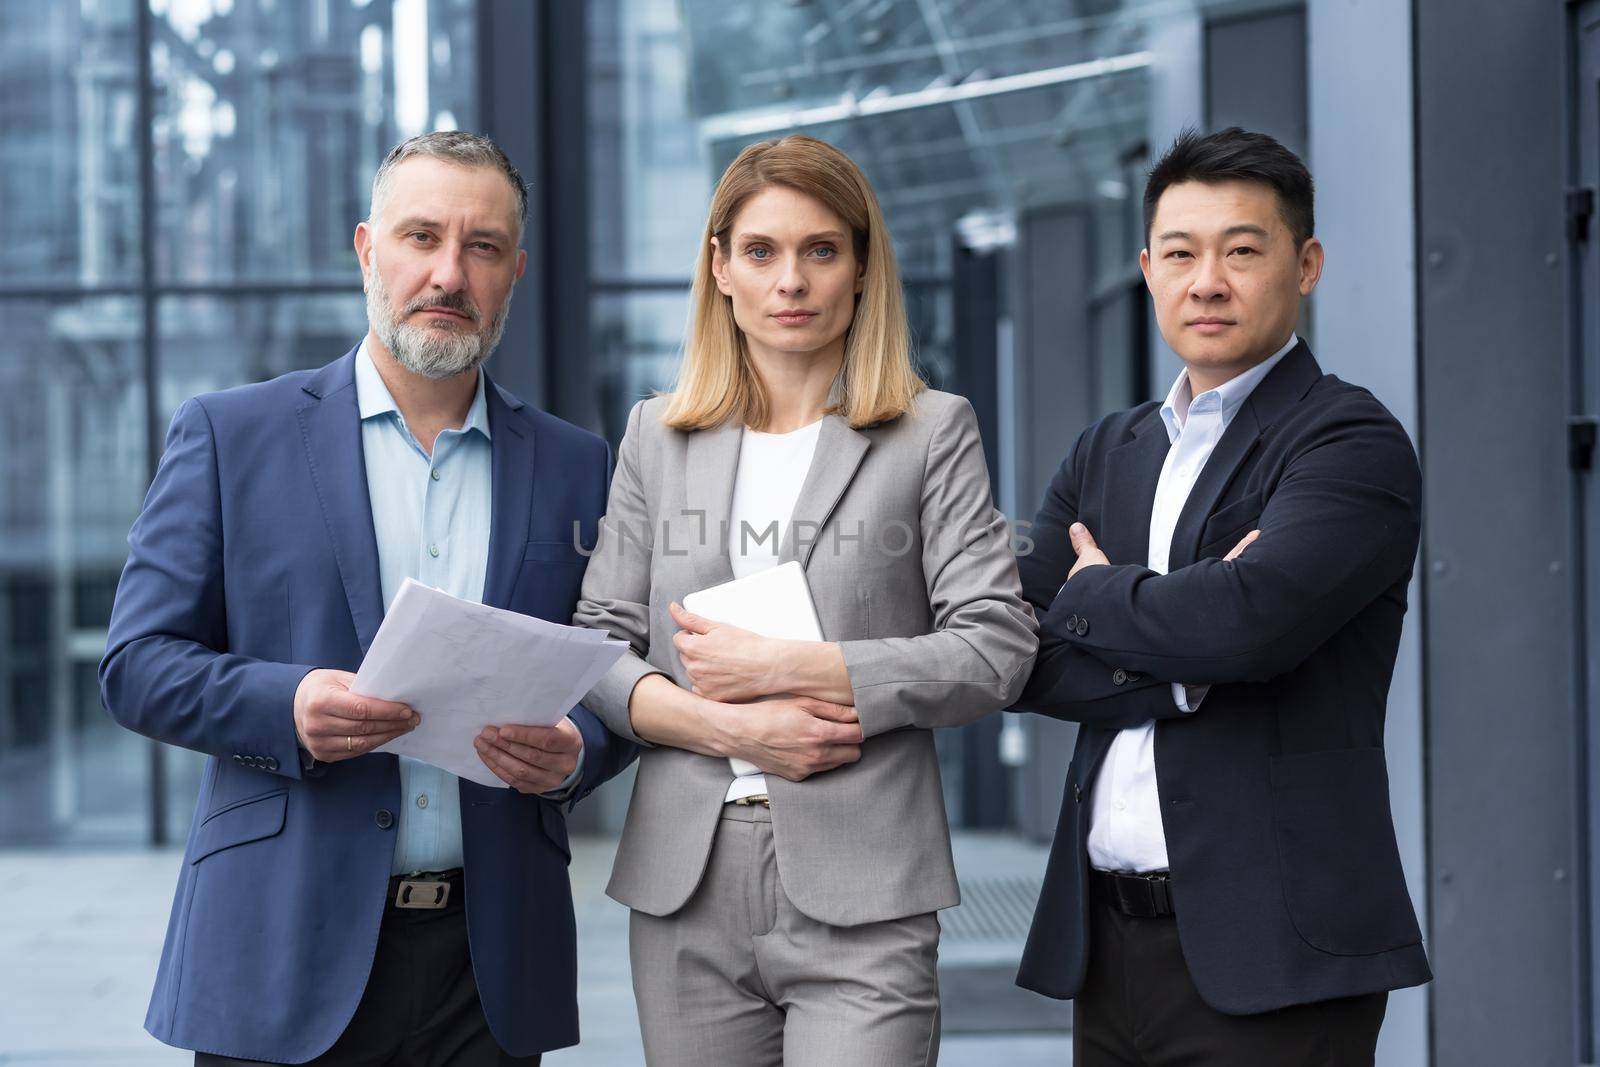 A team of experienced team leaders and specialists, a diverse group of business people, three people in business clothes are serious and focused in business clothes looking at the camera